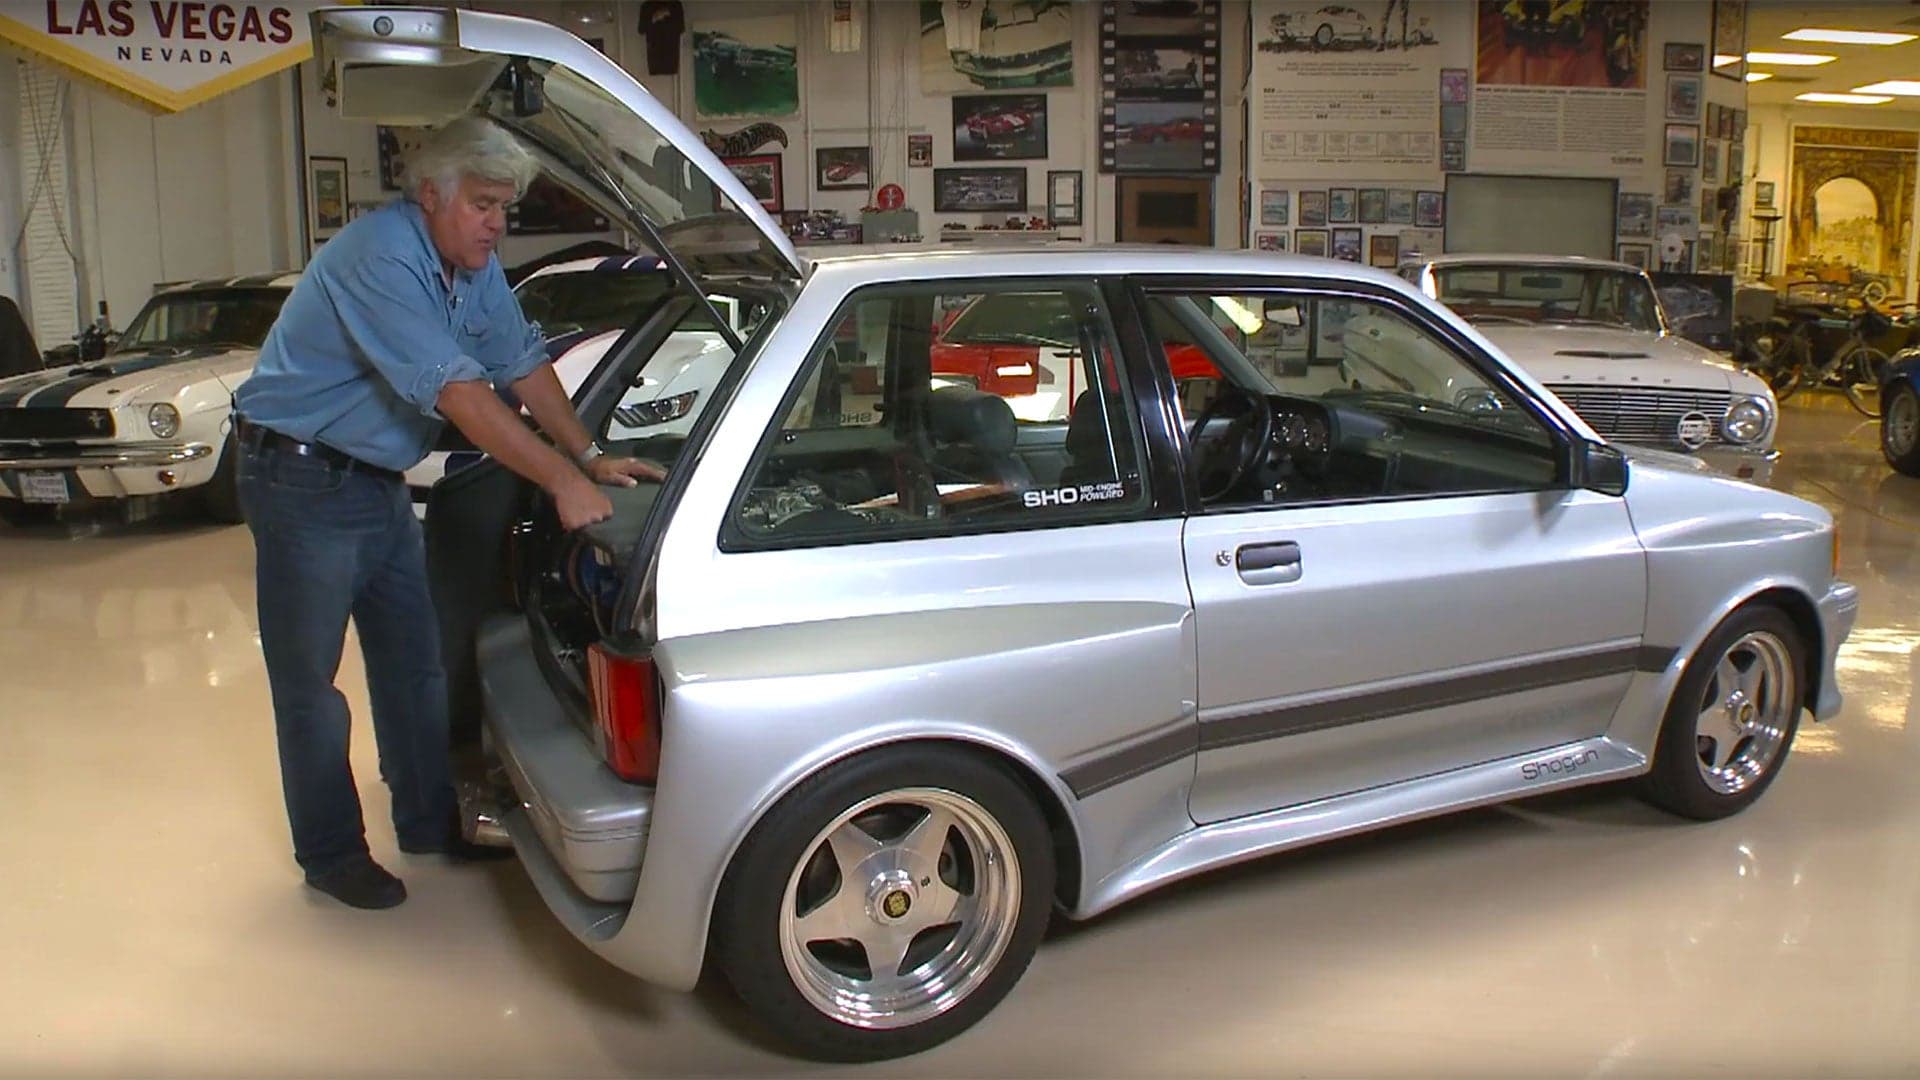 Jay Leno’s Nitrous-Boosted ’89 Ford Shogun Is Insane